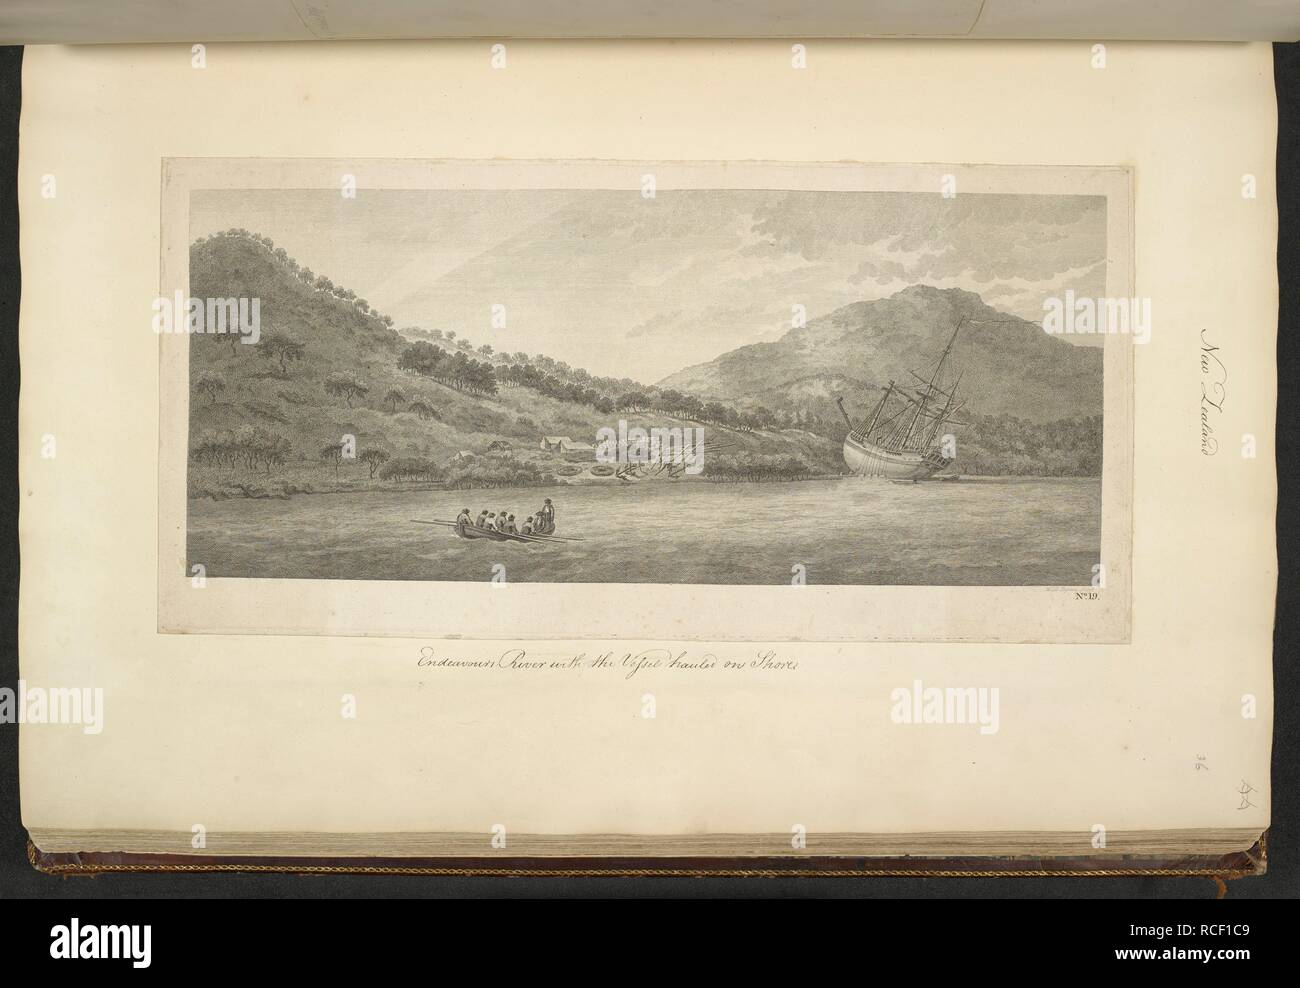 [Whole folio] A view of the Endeavour River, New Holland, with the Endeavour laid on shore, in order to repair the damage which she received on the rocks; June-July 1770. The first known landscape of Australia. Engraving by William Byrne, probably after a lost drawing by Sydney Parkinson. A Collection of Drawings made in the Countries visited by Capt. Cook in his First Voyage. 1768-1771. 1773. Source: Add. 23920, f.36. Language: English. Stock Photo